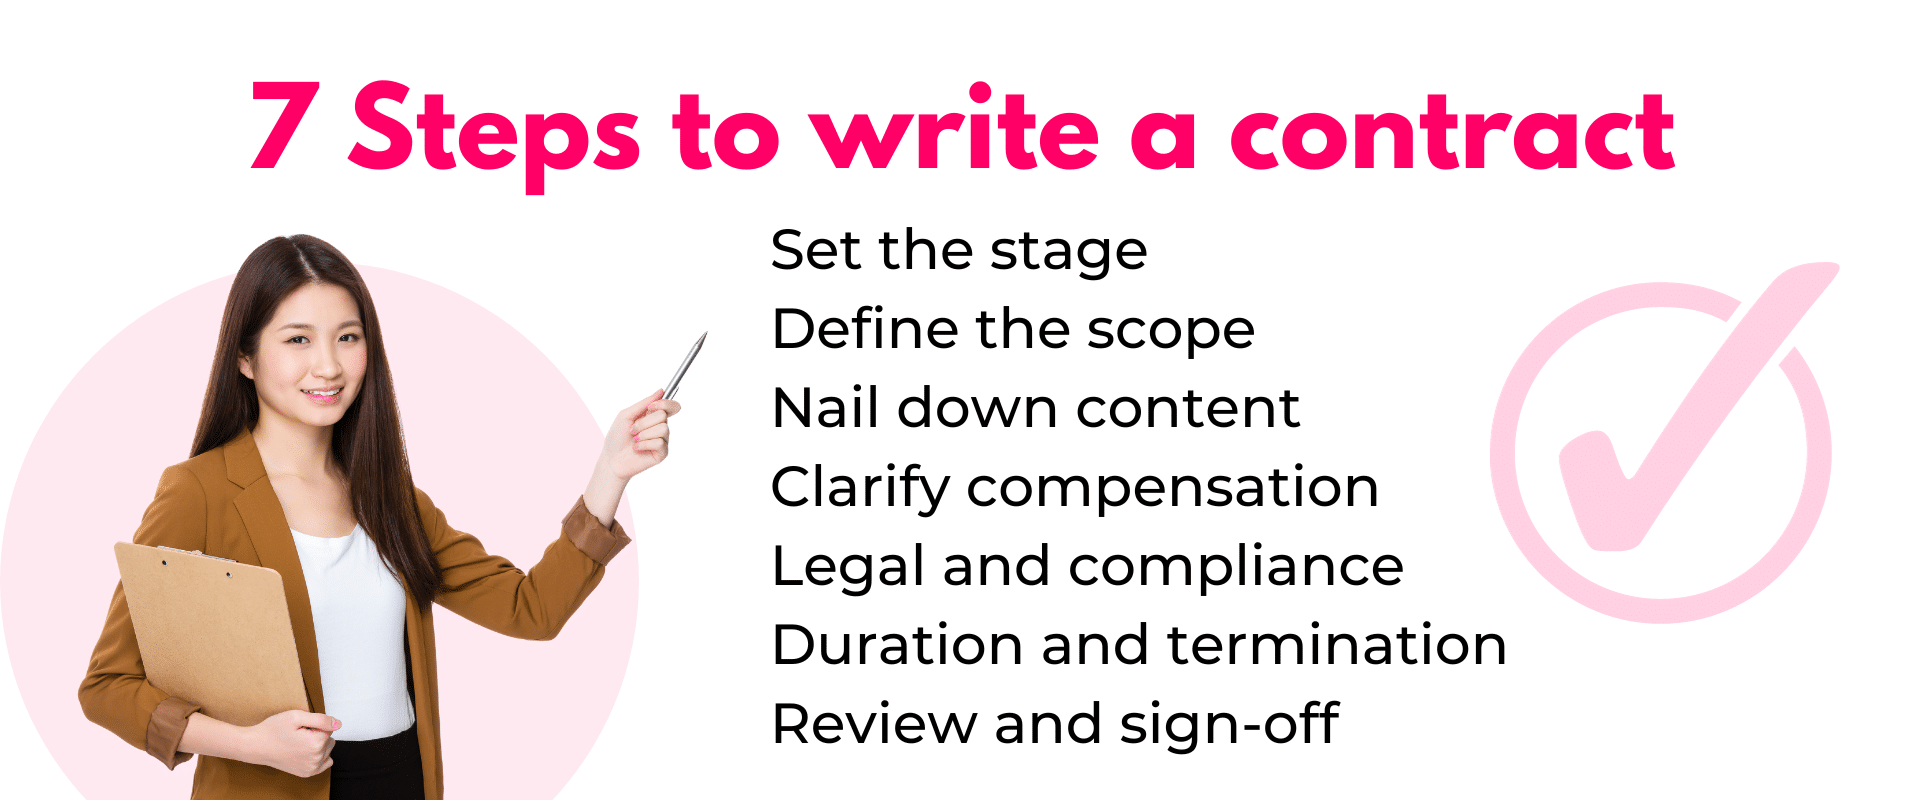 7 steps to write a contract.